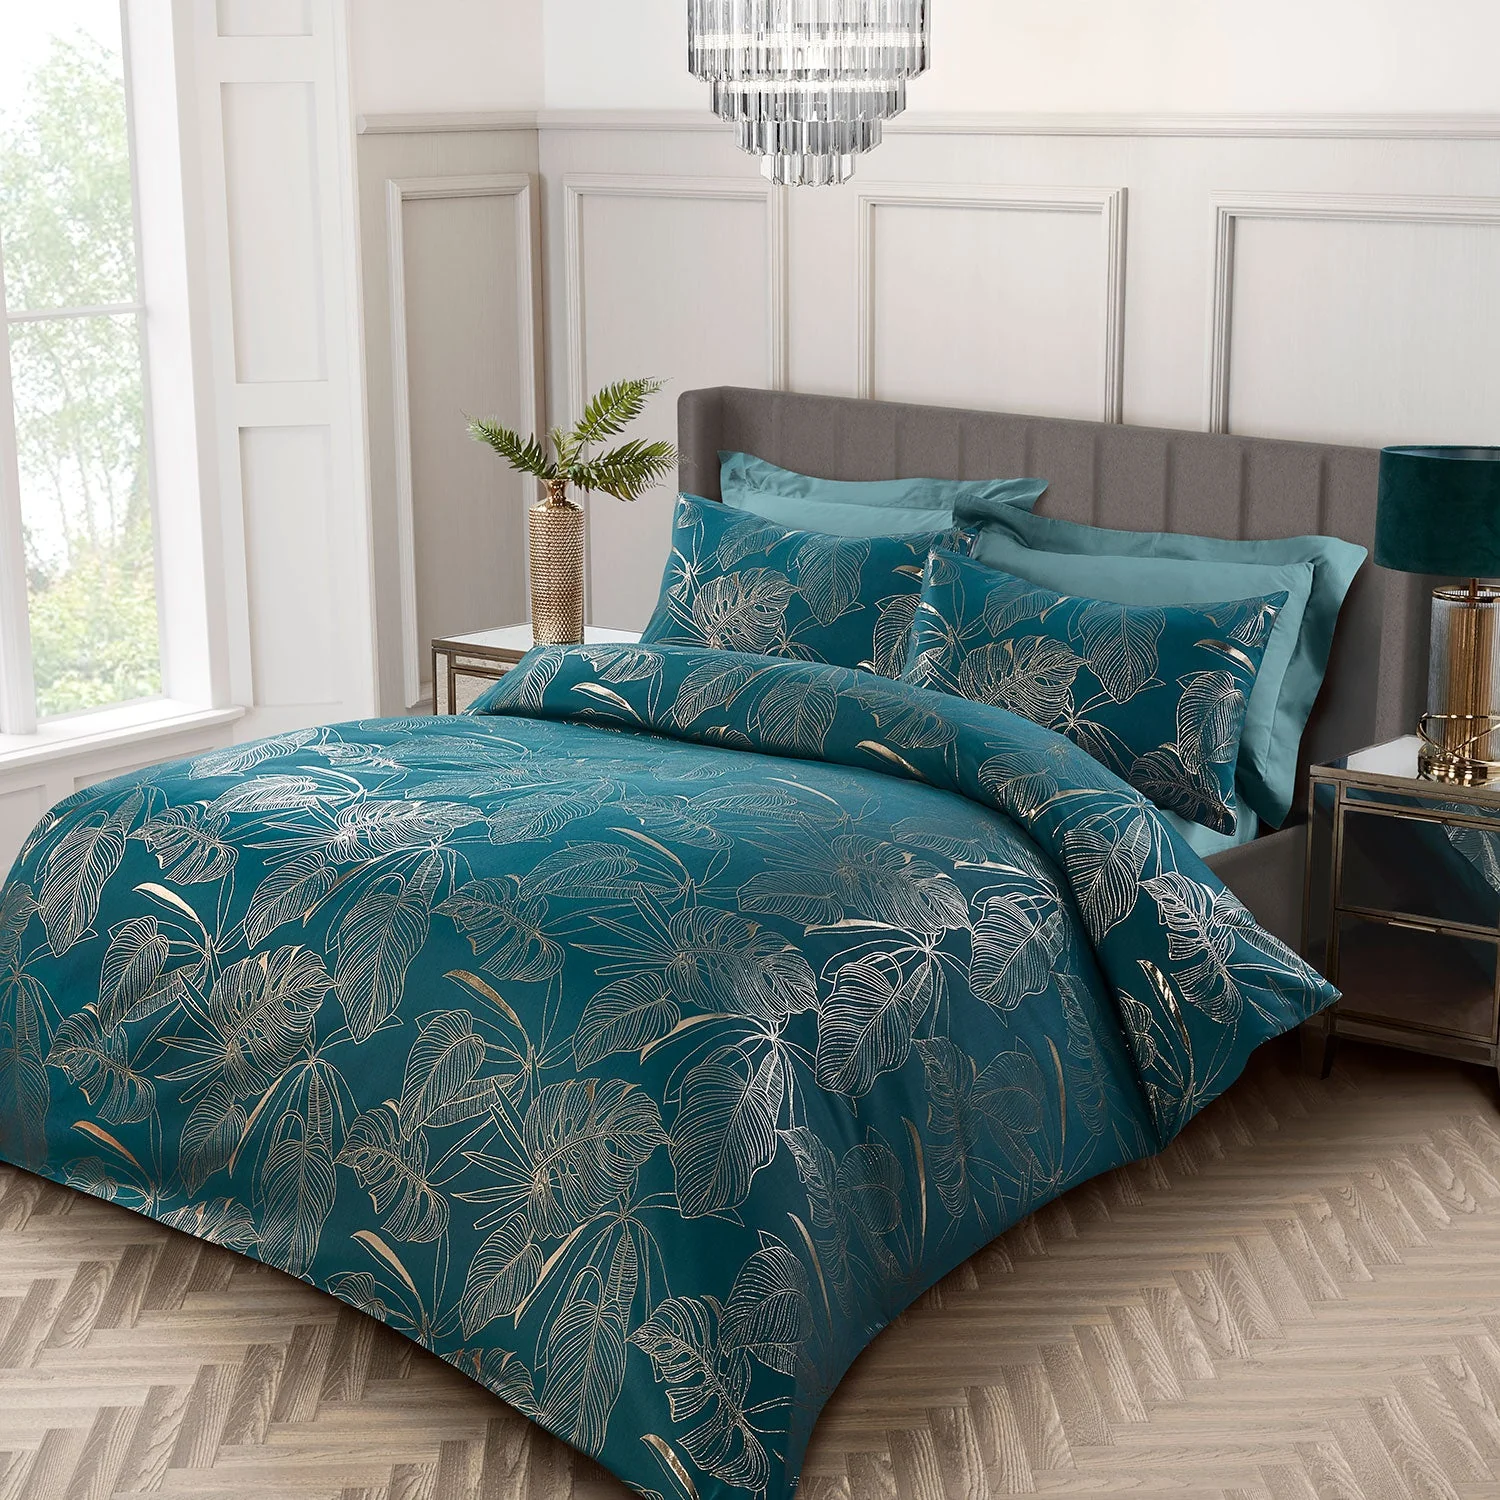 Enhance your Bedroom Comfort with a Luxury Bedding Set